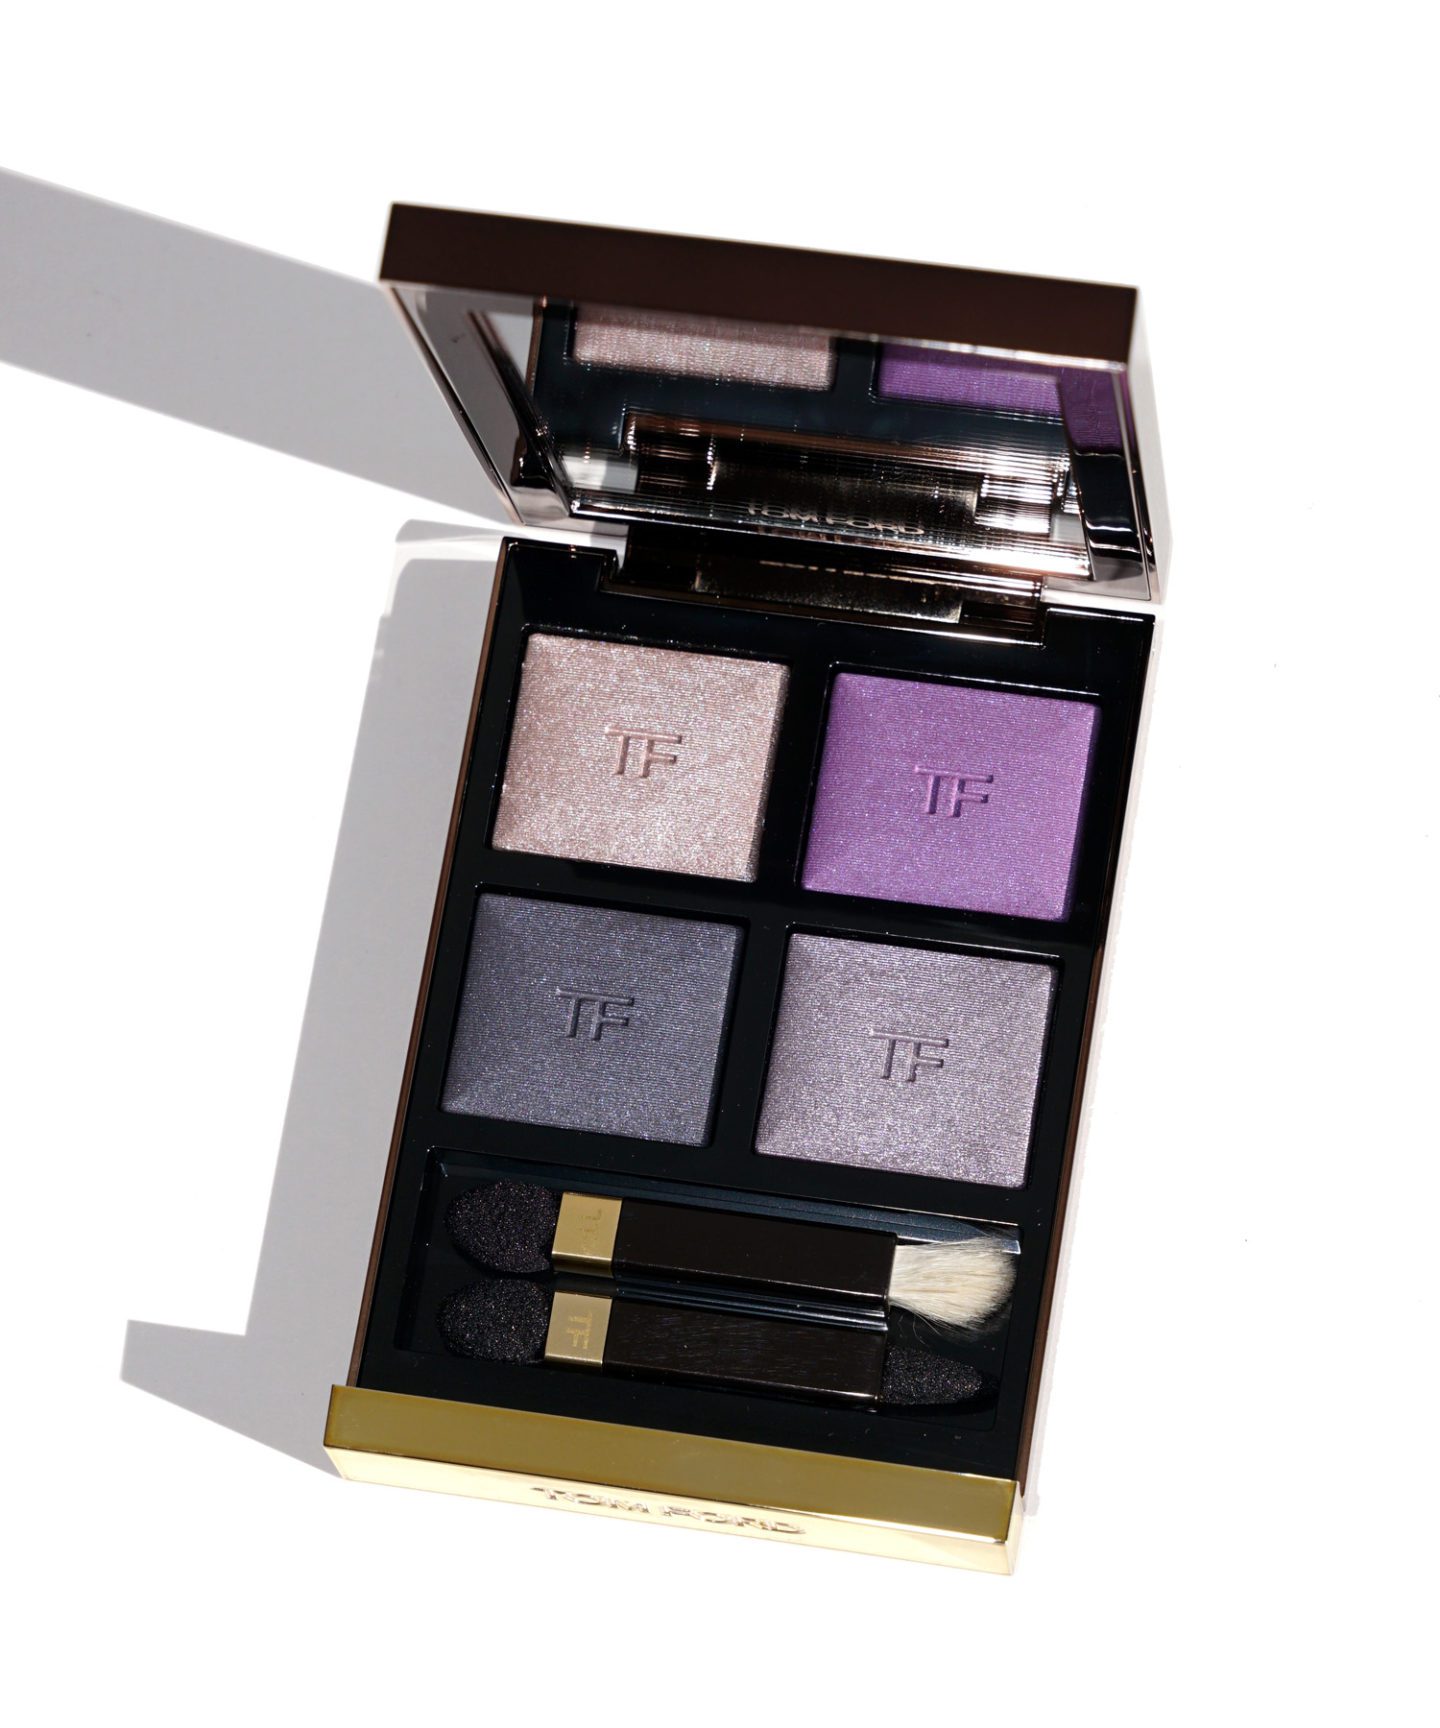 Tom Ford Daydream Eyeshadow Quad Review | The Beauty Look Book